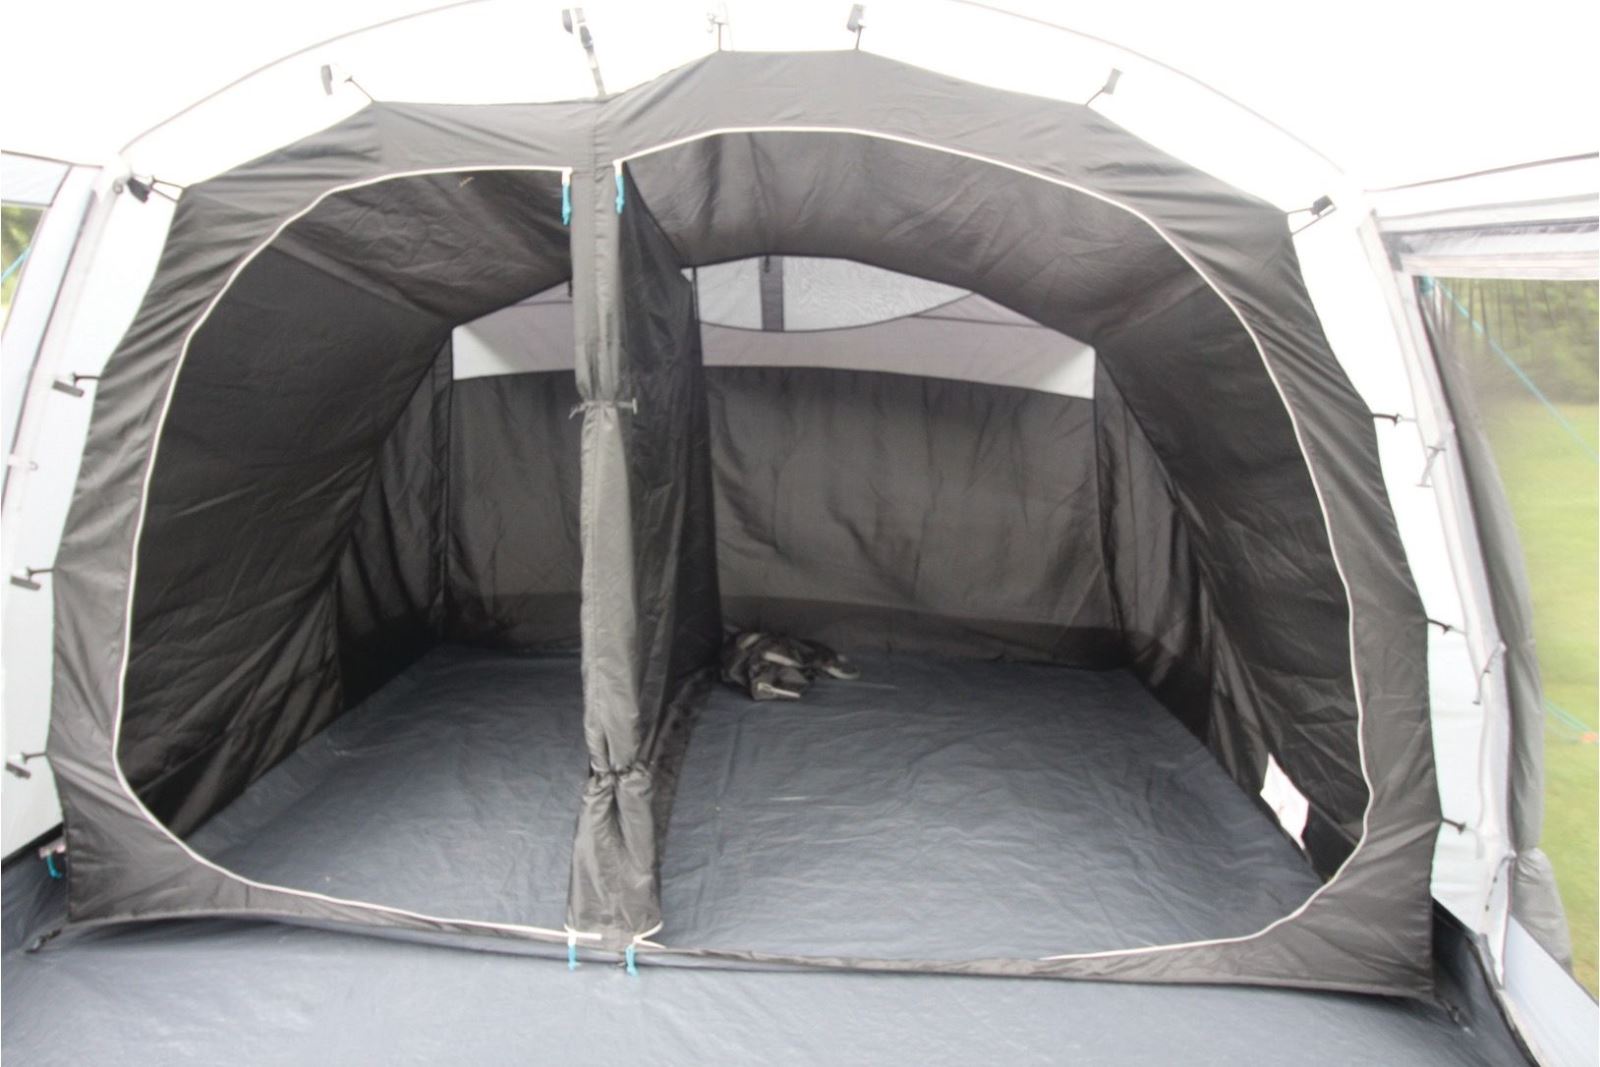 A look inside the Outdoor Revolution Camp Star 500XL DT